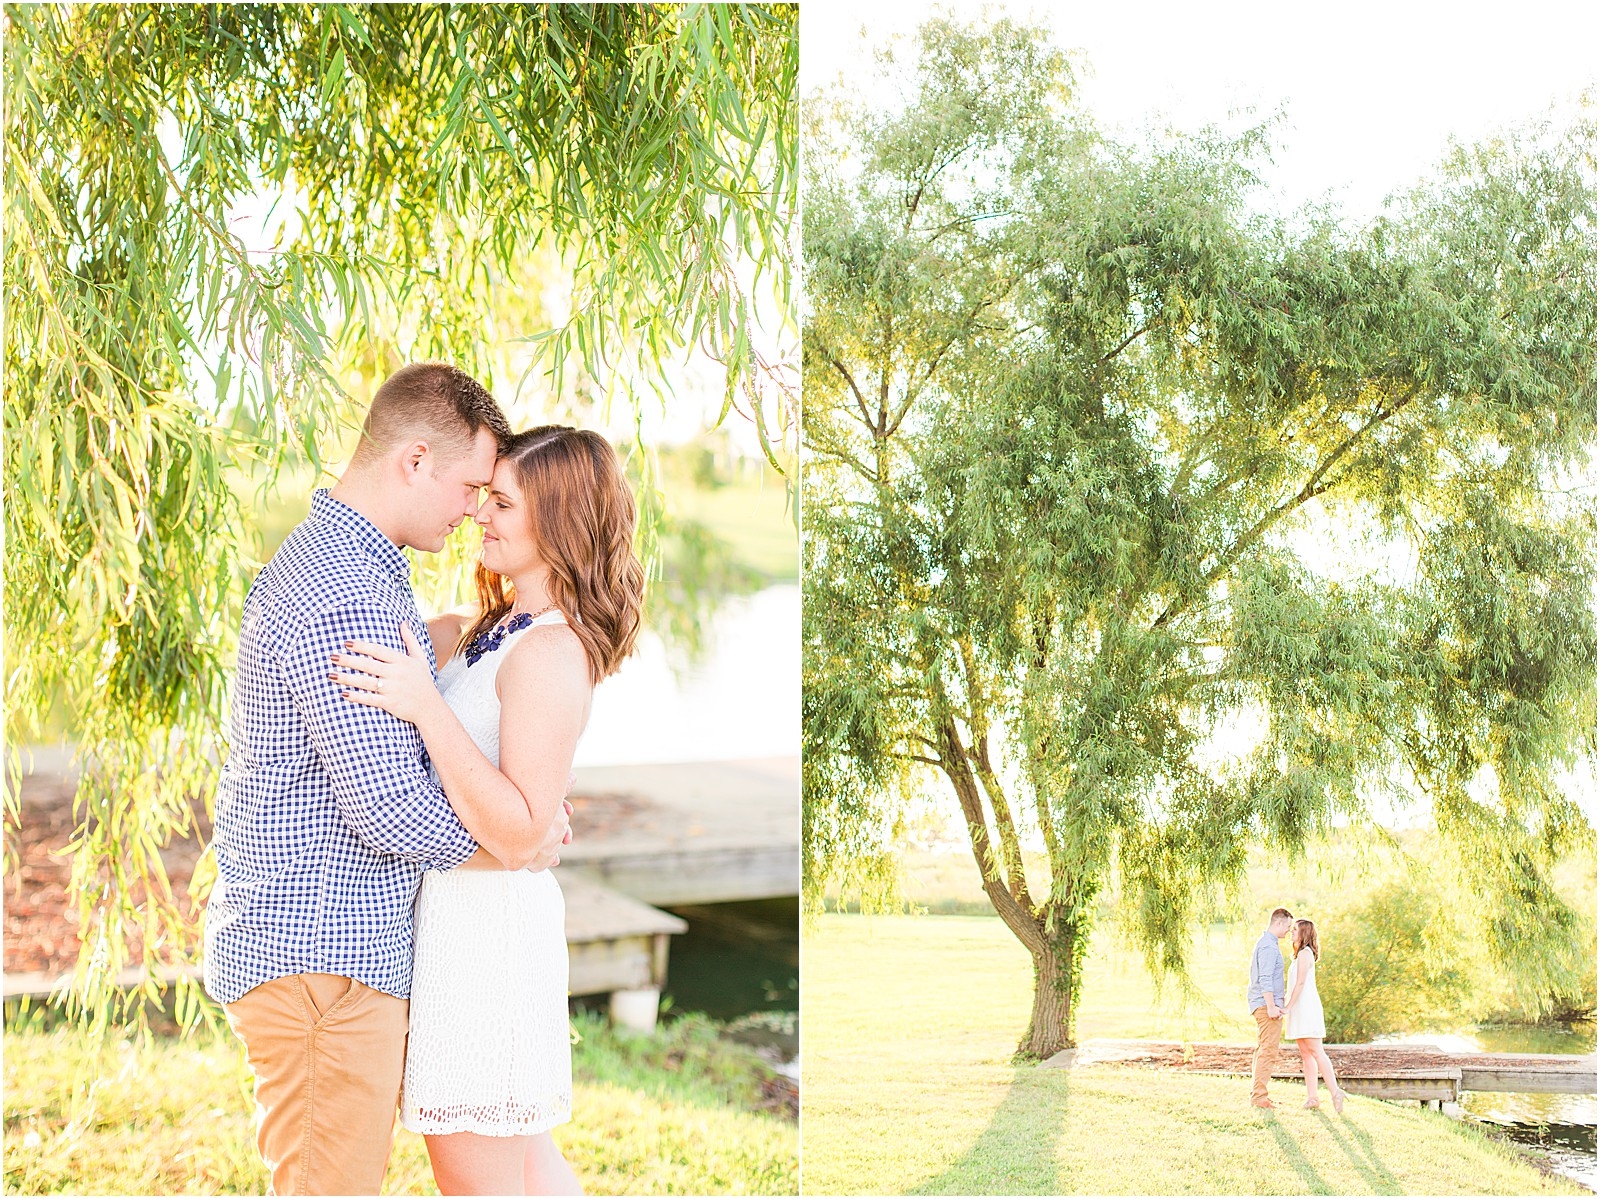 Downtown Huntingburgh Engagement Session | Gabby and Aidan | Bret and Brtandie Photography 017.jpg